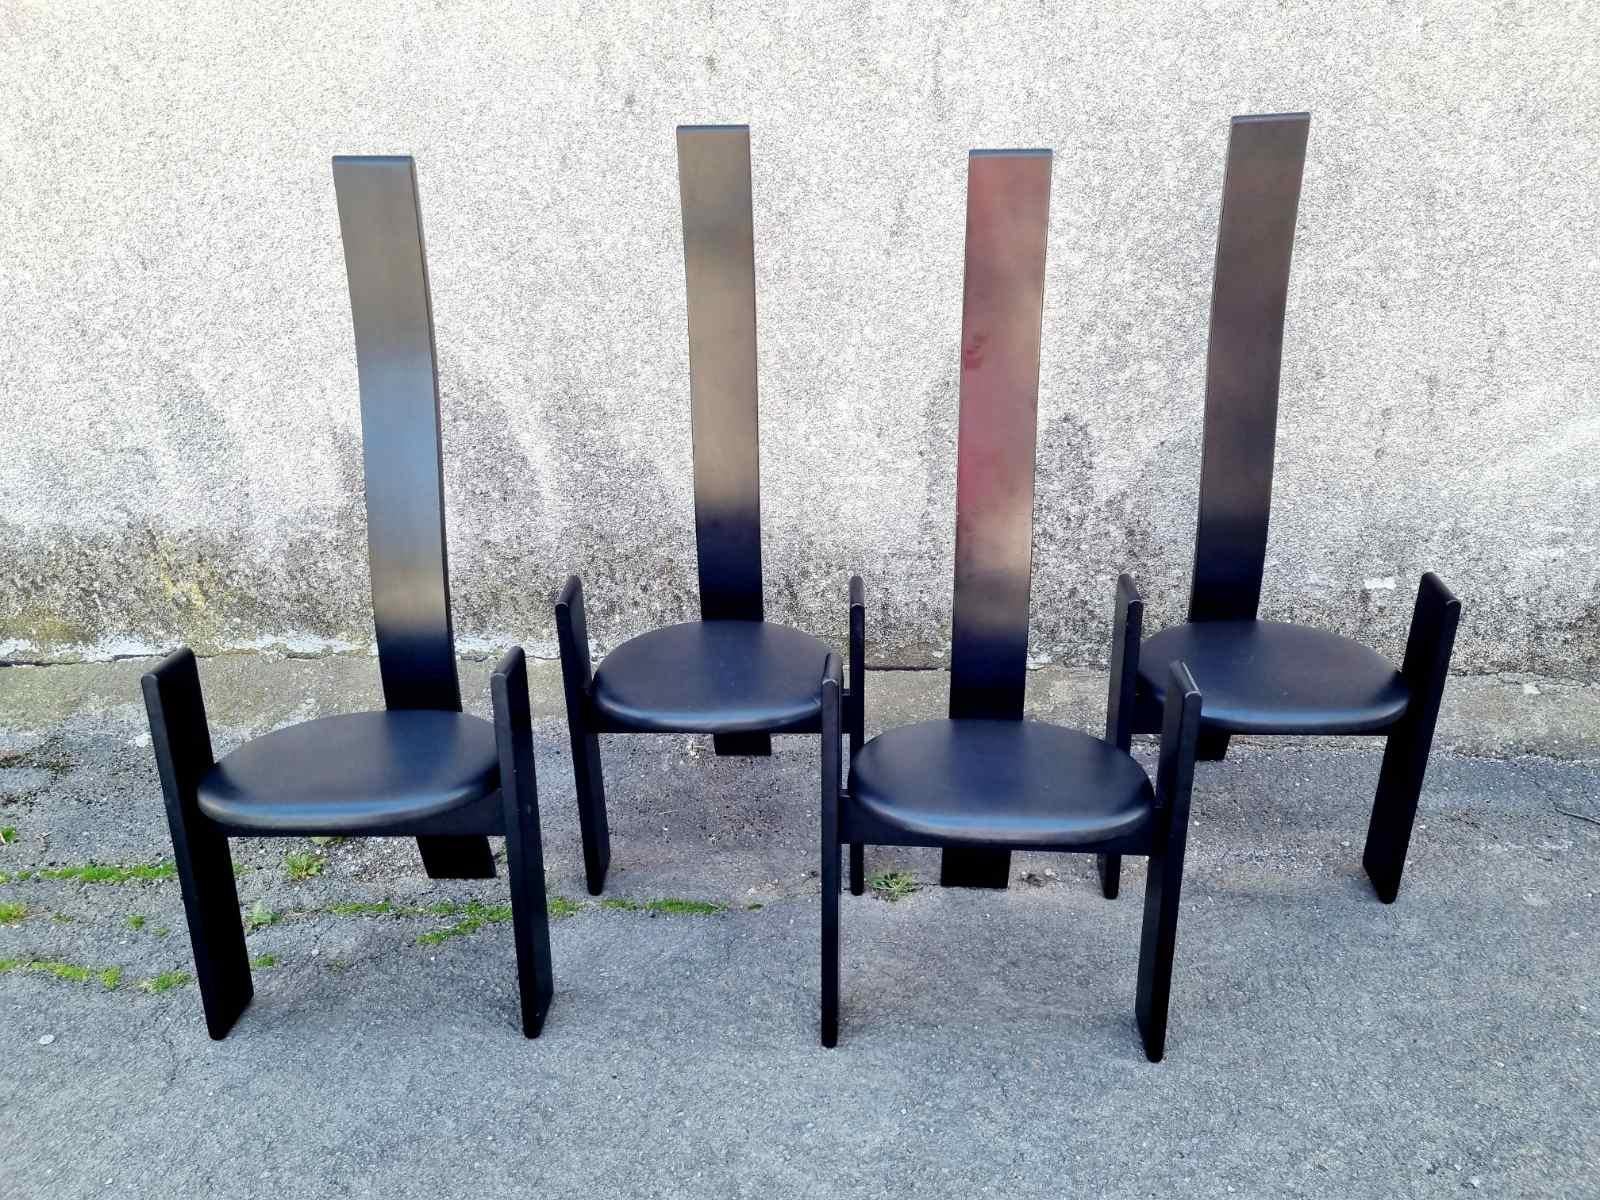 Mid-Century Modern black Lacquered wooden dining chairs Golem by Vico Magistretti, Italy 1969.
Nice set of 4 dining chairs „Golem SD51“ designed by Vico Magistretti for Poggi in 1969. The unique frame of the chairs are made of black high lacquered